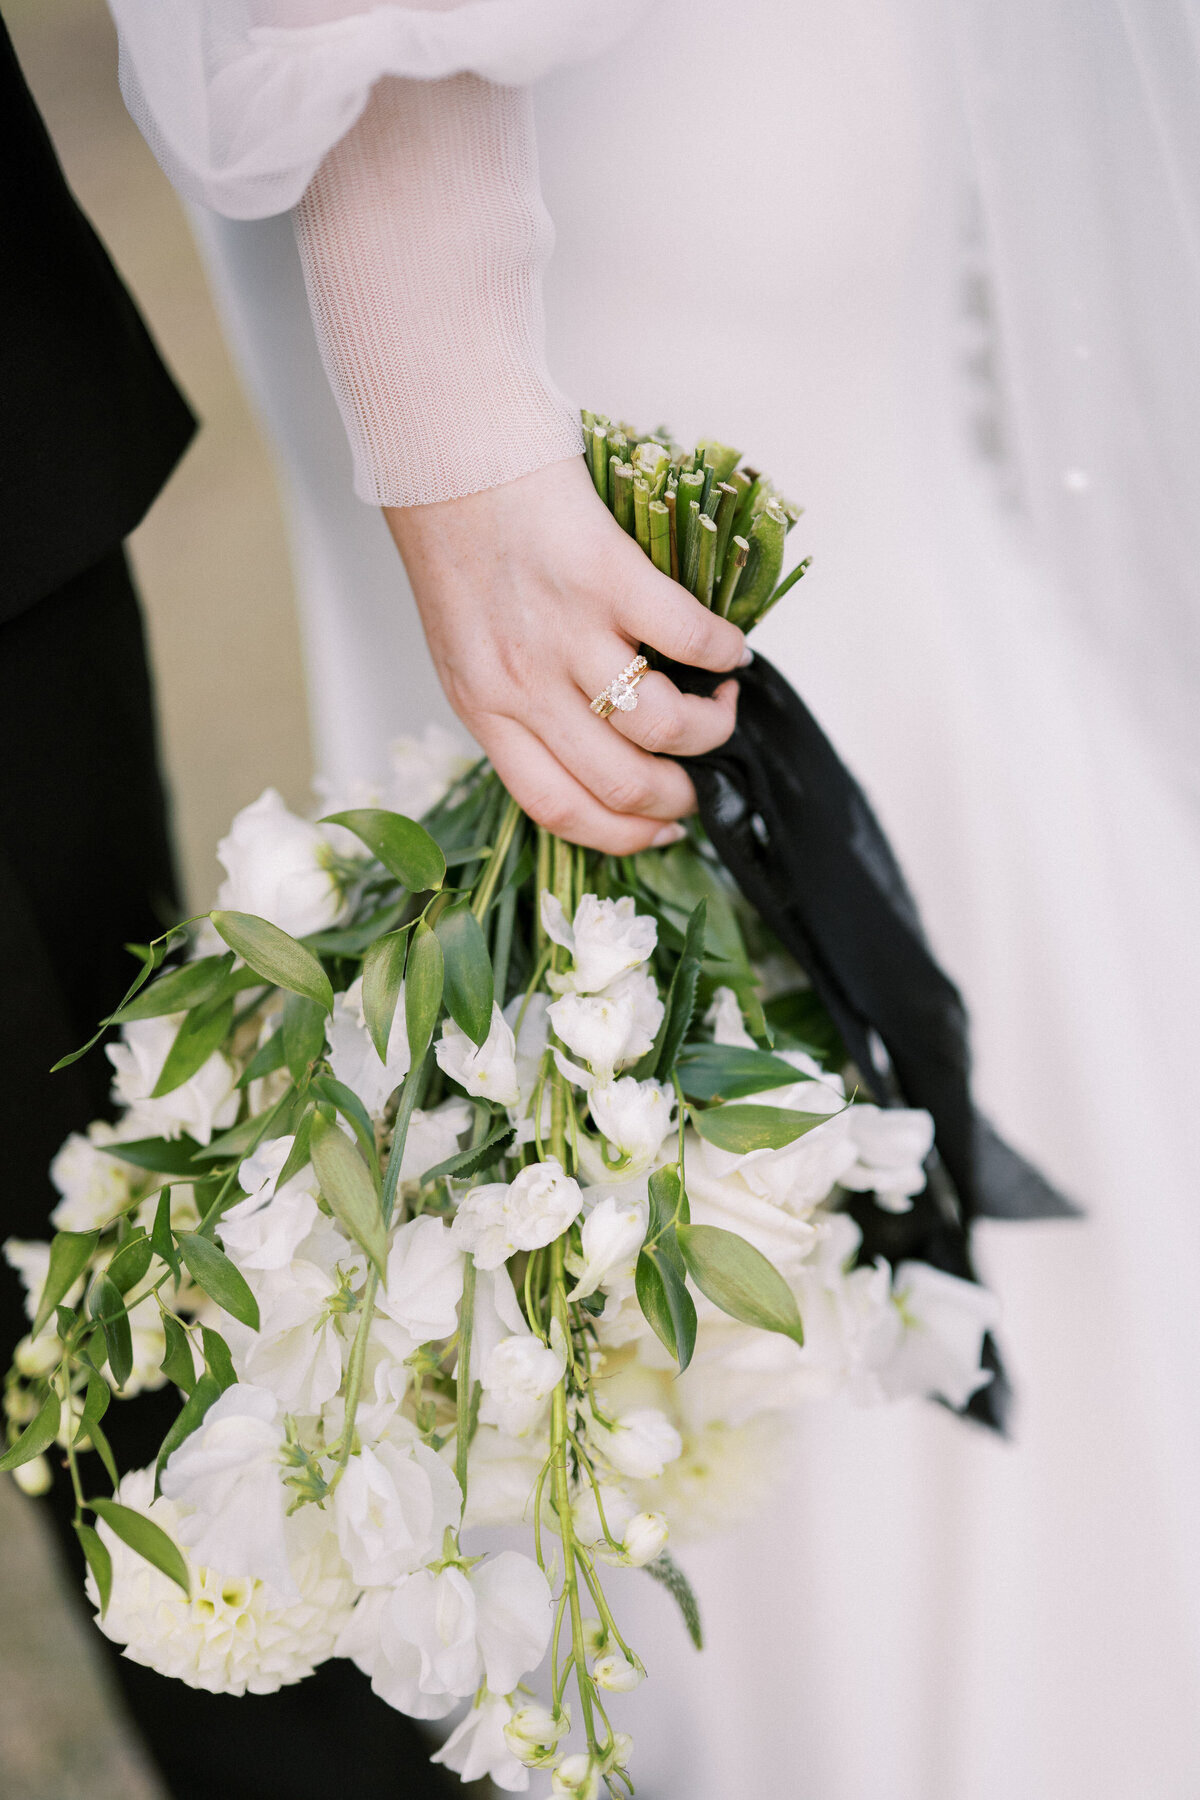 Detail image of bridal bouquet and bride wedding ring